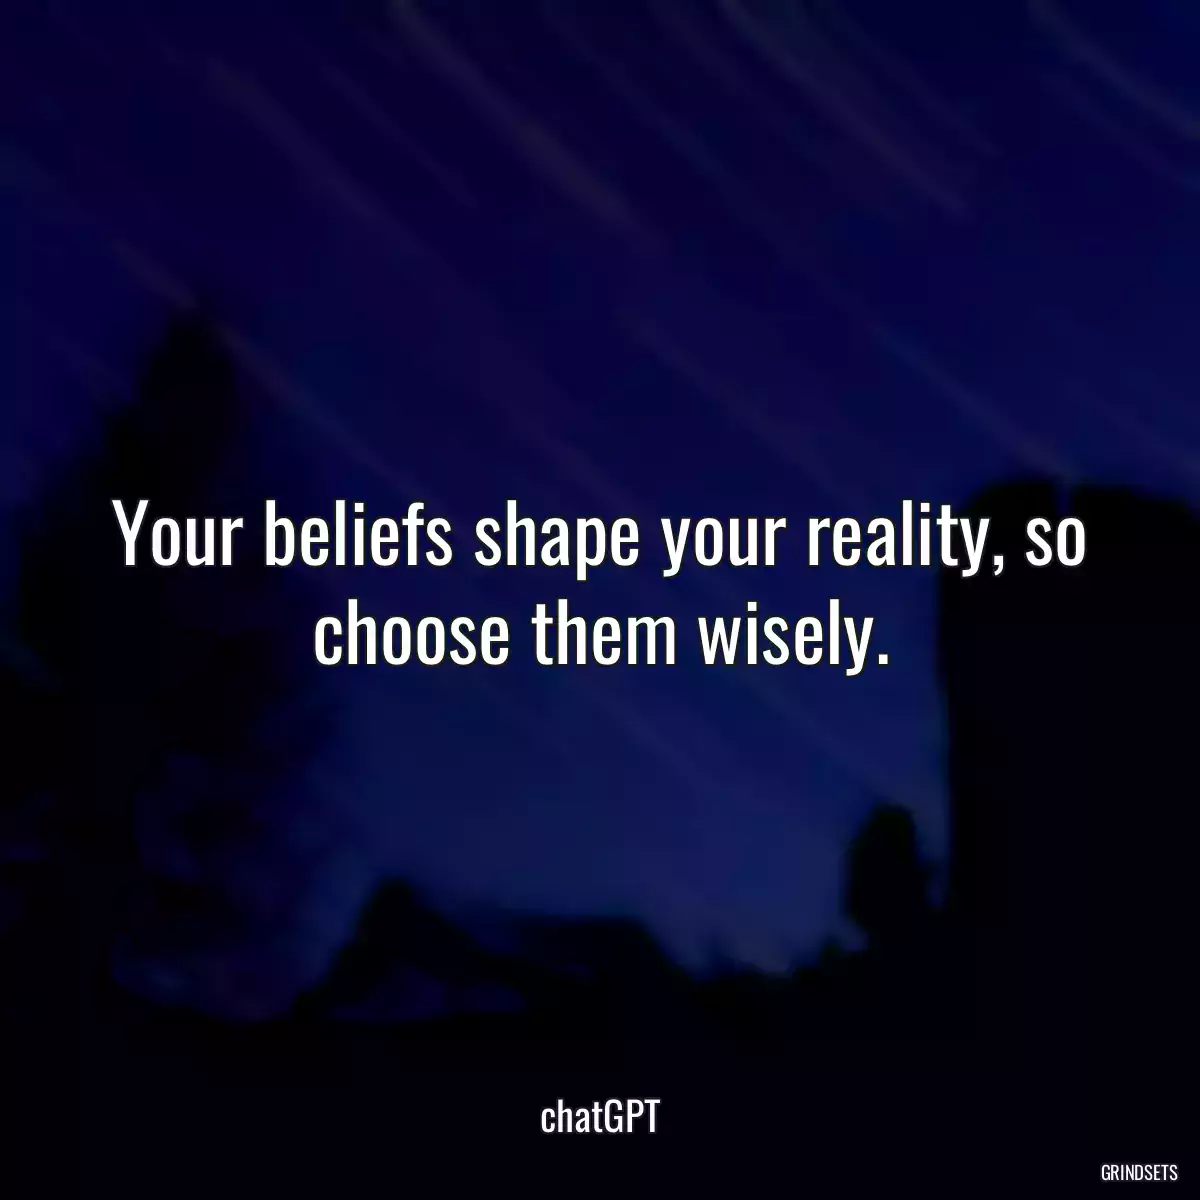 Your beliefs shape your reality, so choose them wisely.